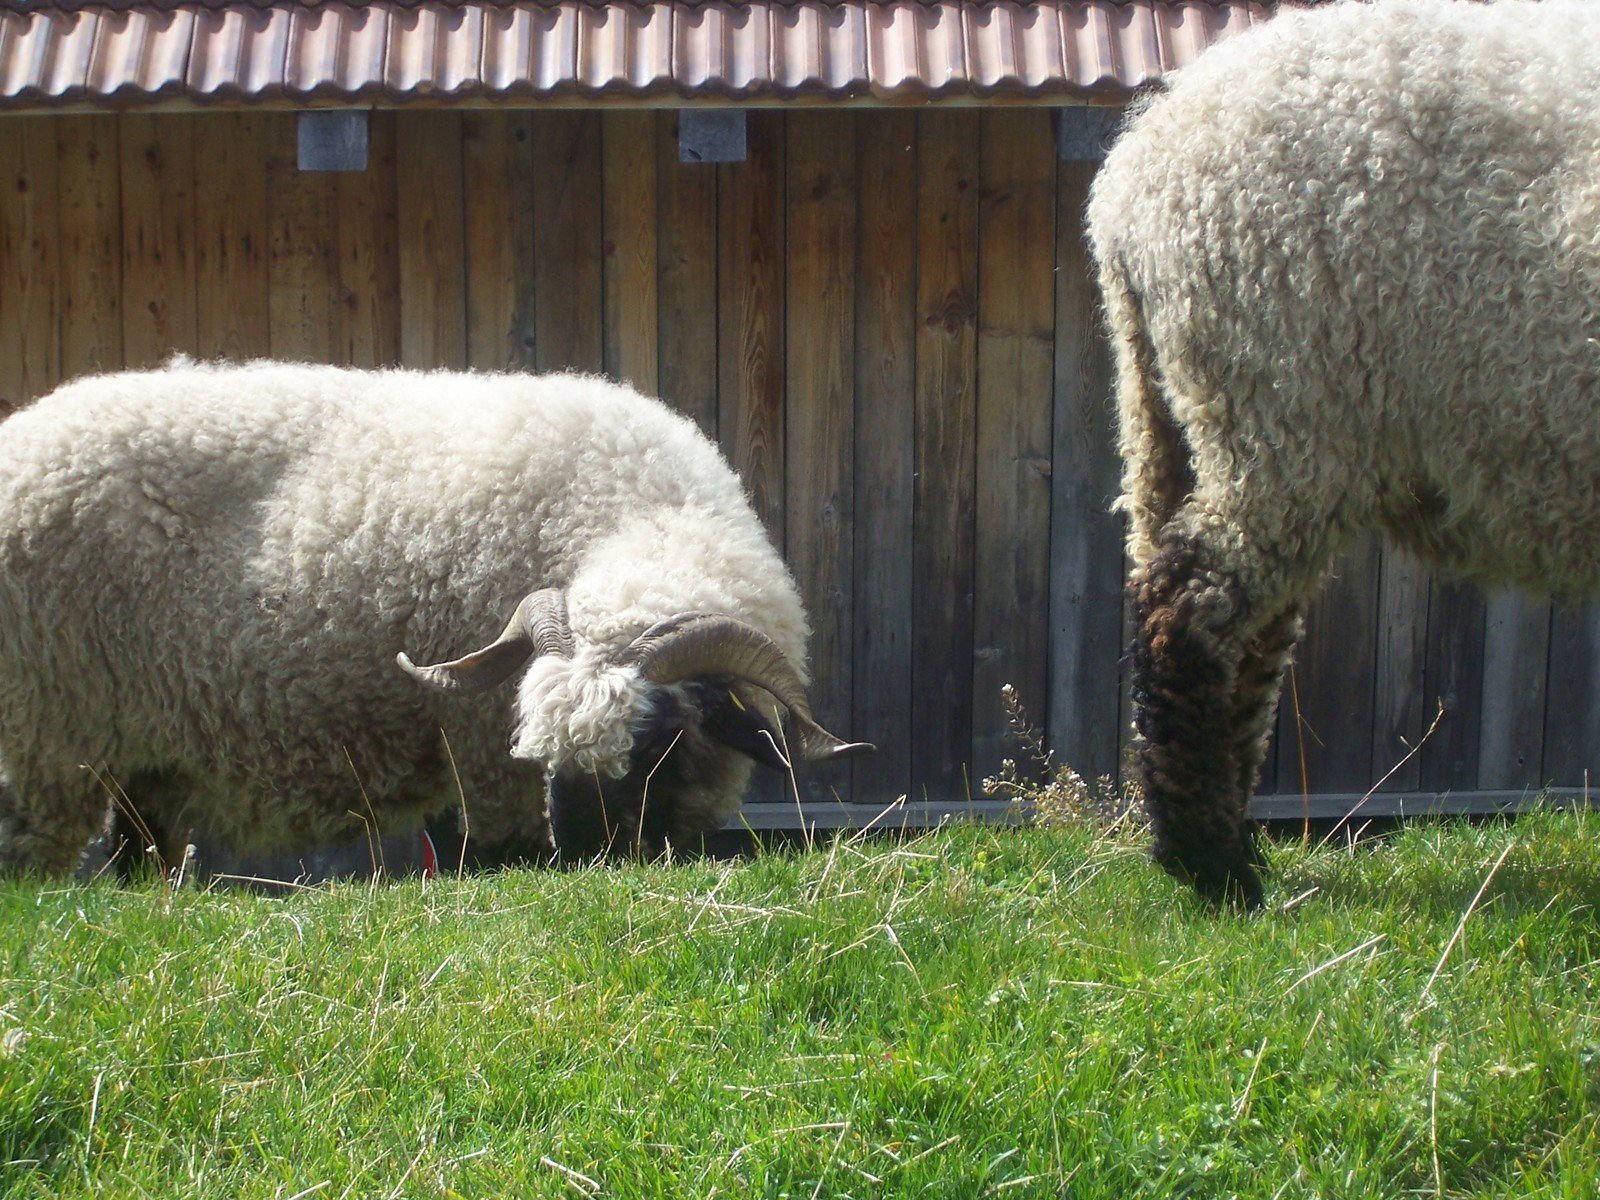 some sheep grazing on grass in front of a wooden structure